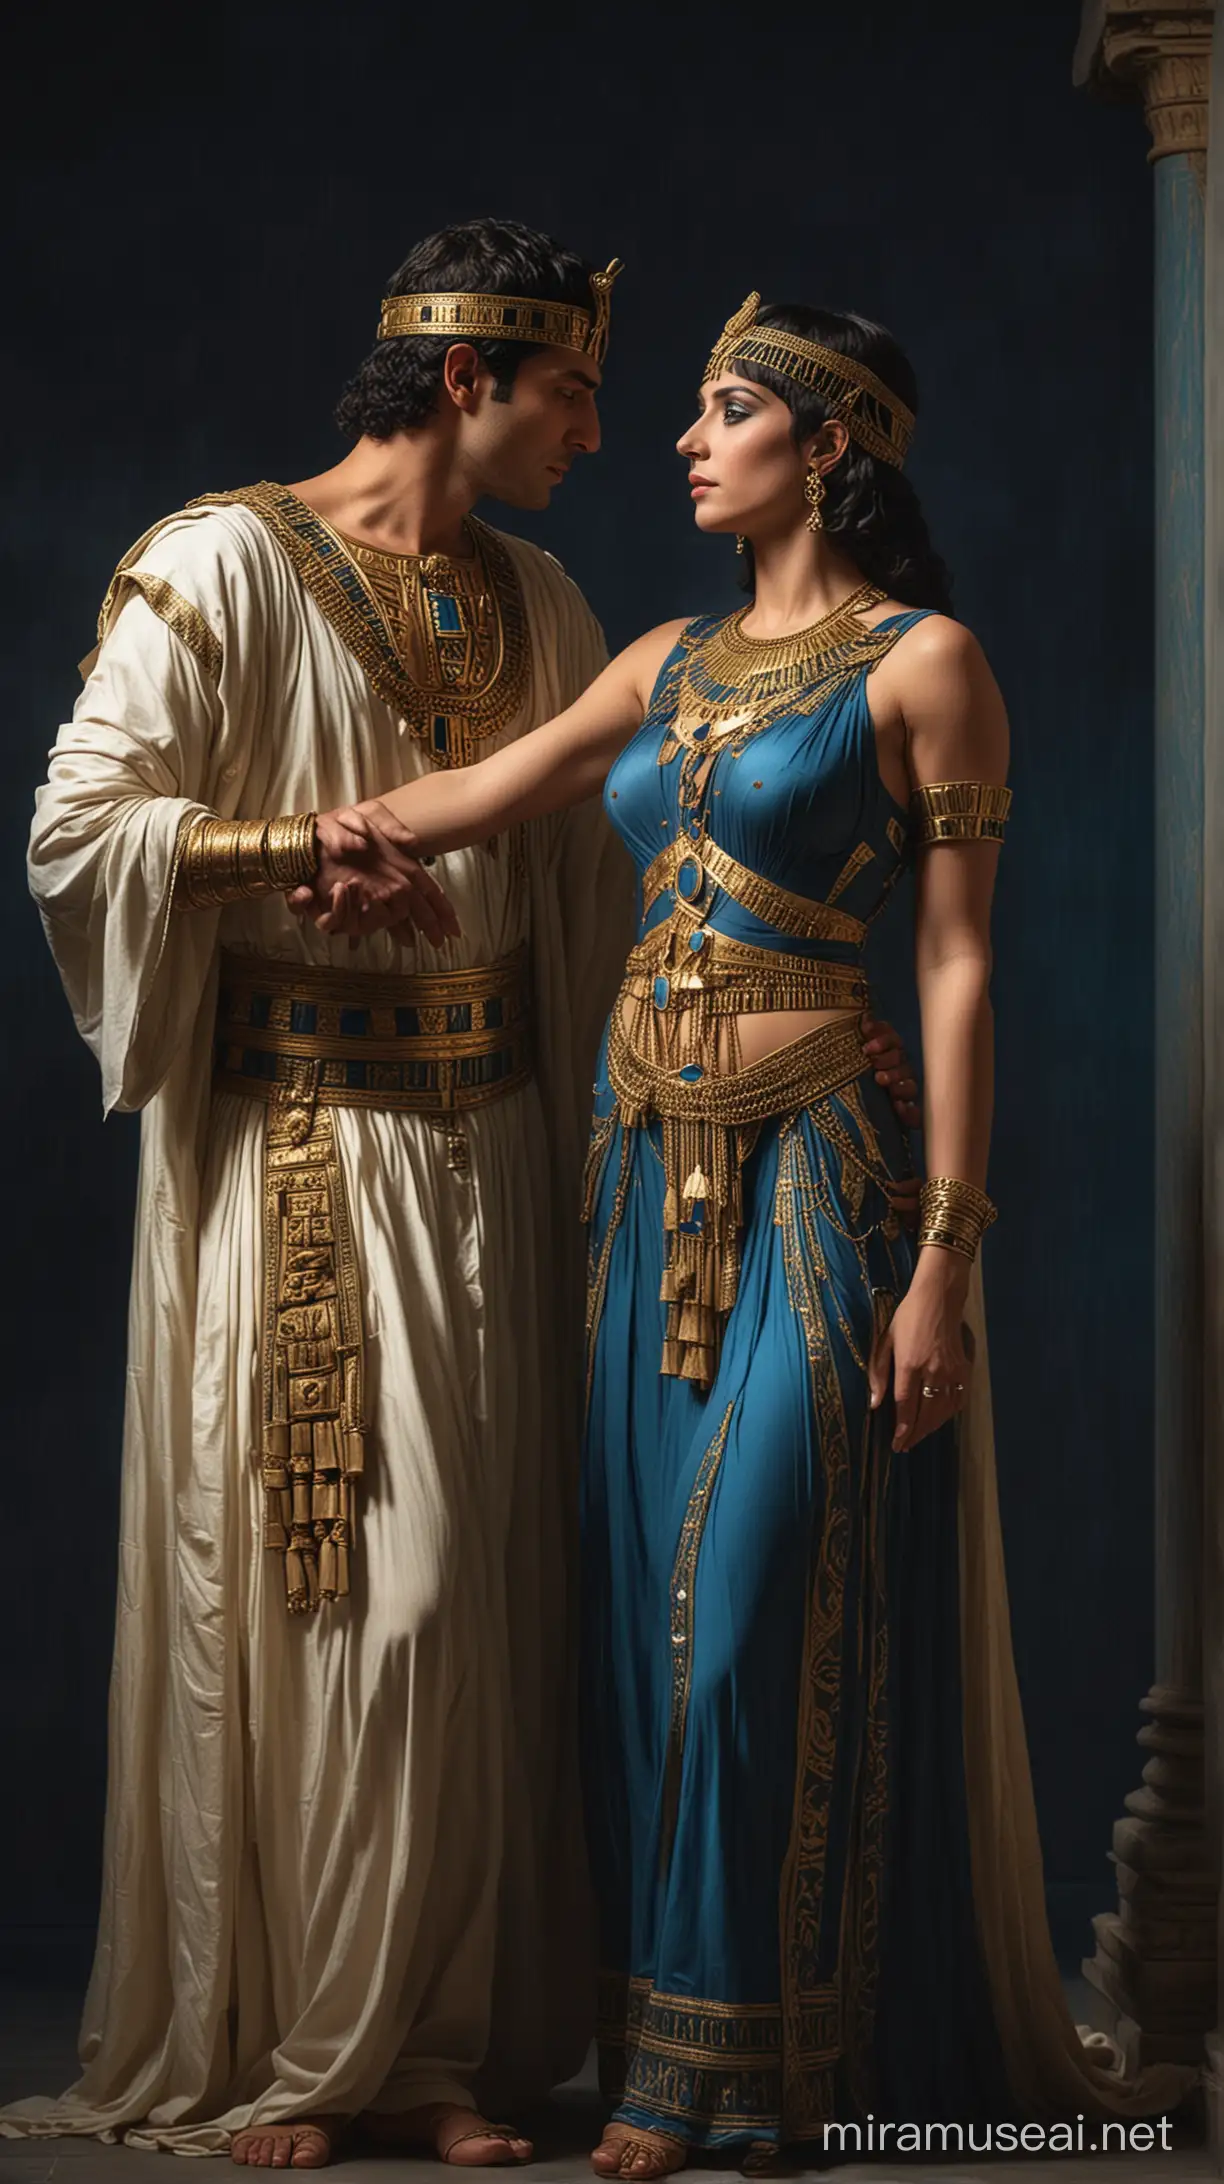 A (((dramatic scene))) where Cleopatra, dressed in luxurious, period garb, is engaged in a passionate embrace with two suave gentlemen, set against a (softly glowing, midnight blue backdrop)